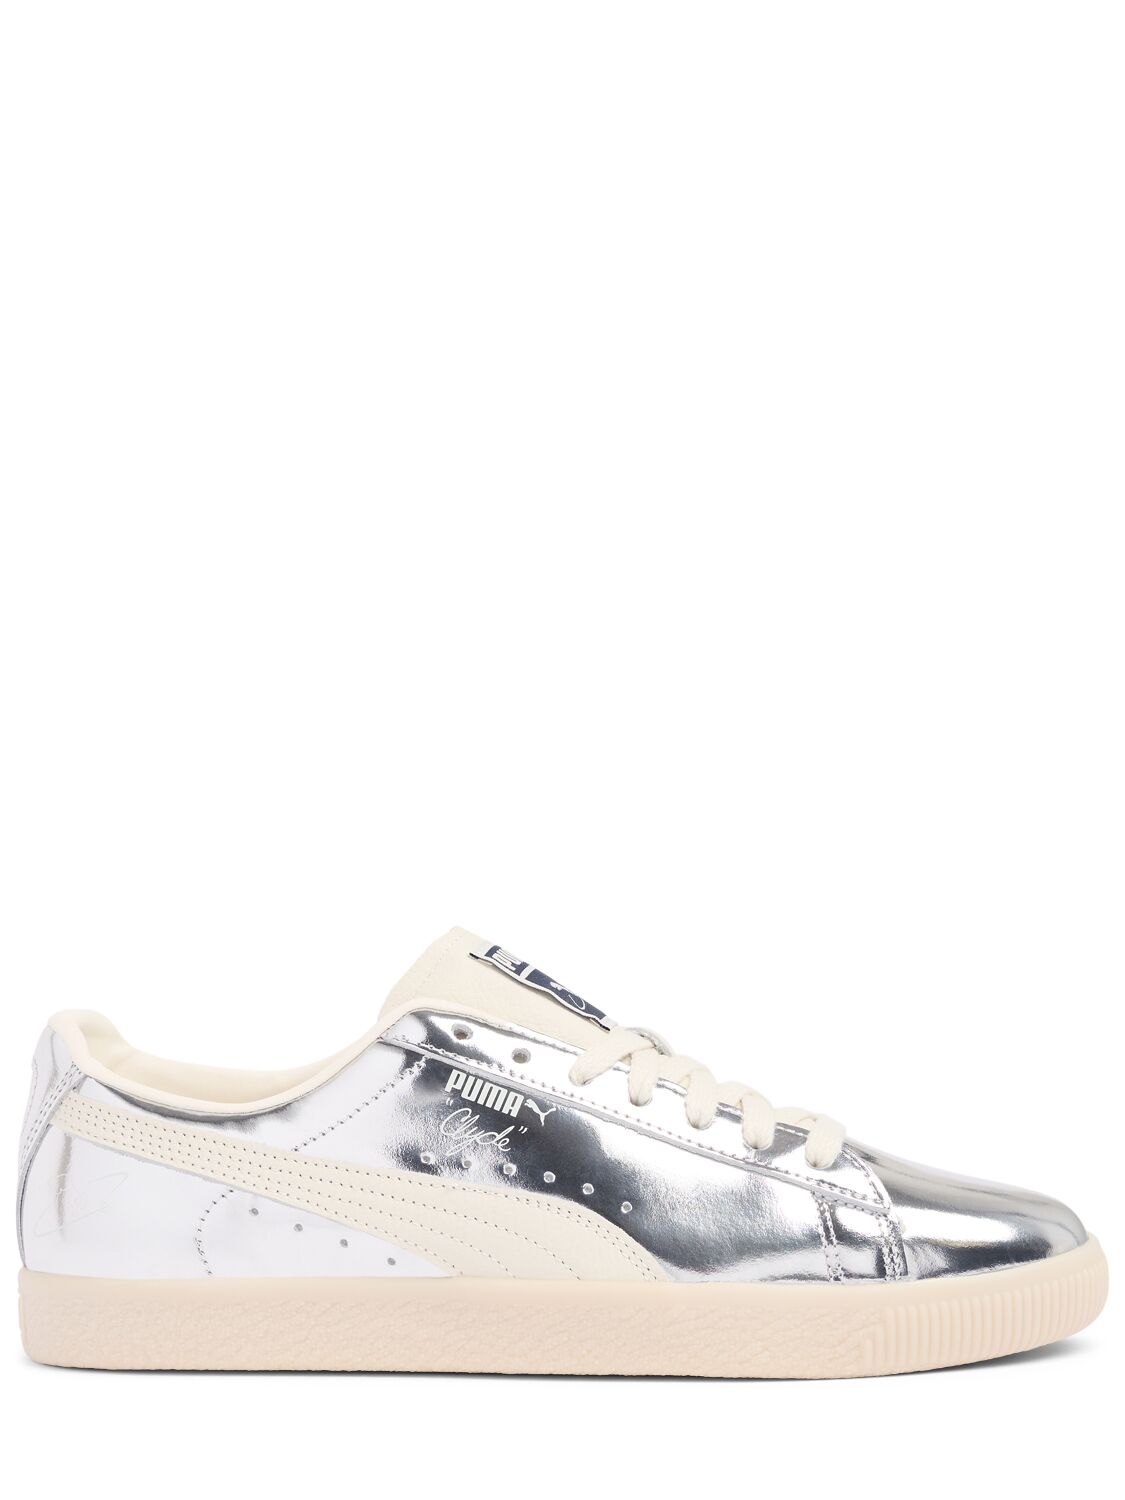 Puma Clyde 3024 Sneakers In Silver